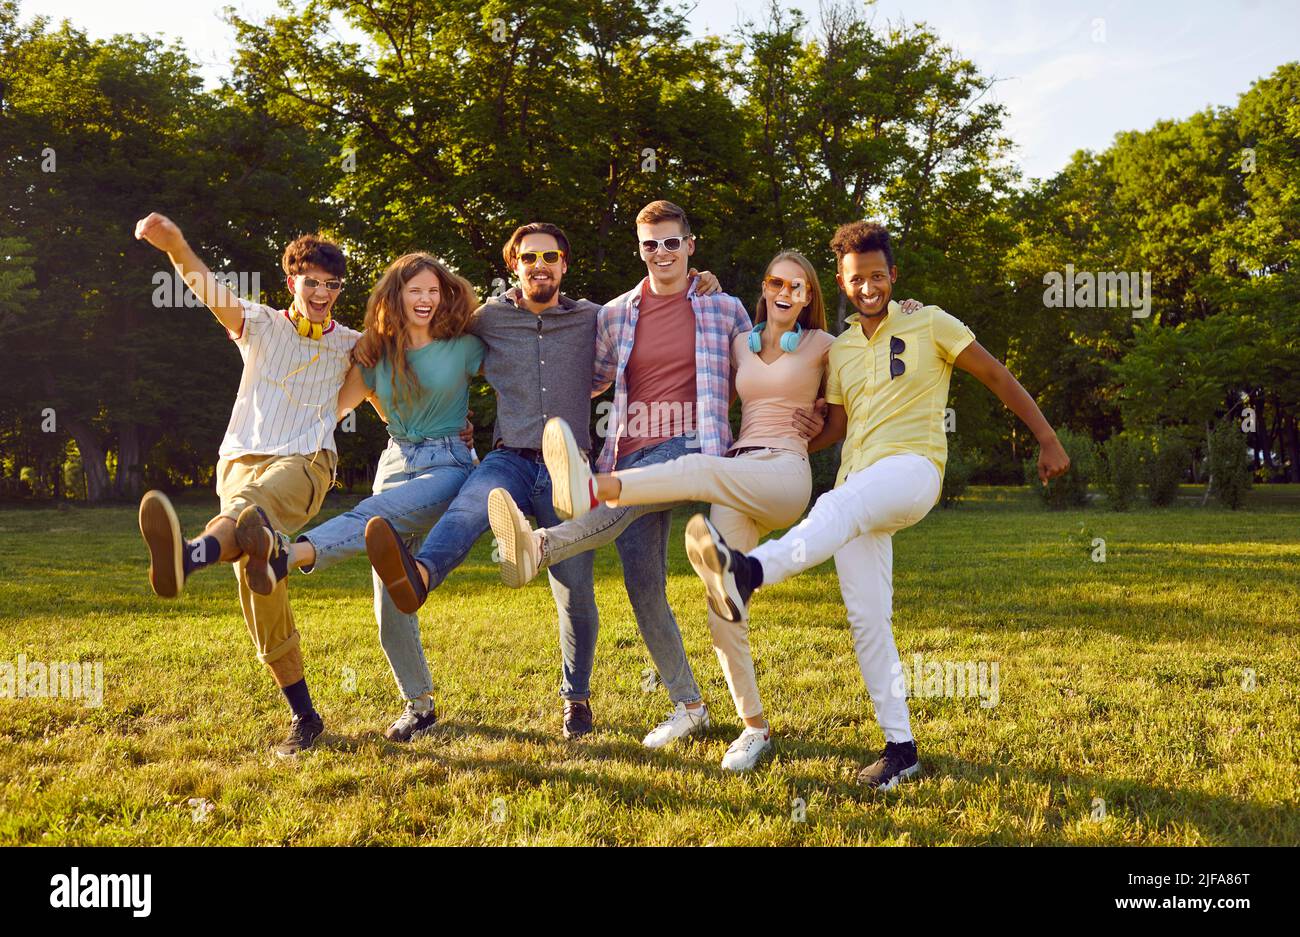 The Best Tips and Tricks for Photographing Group Poses